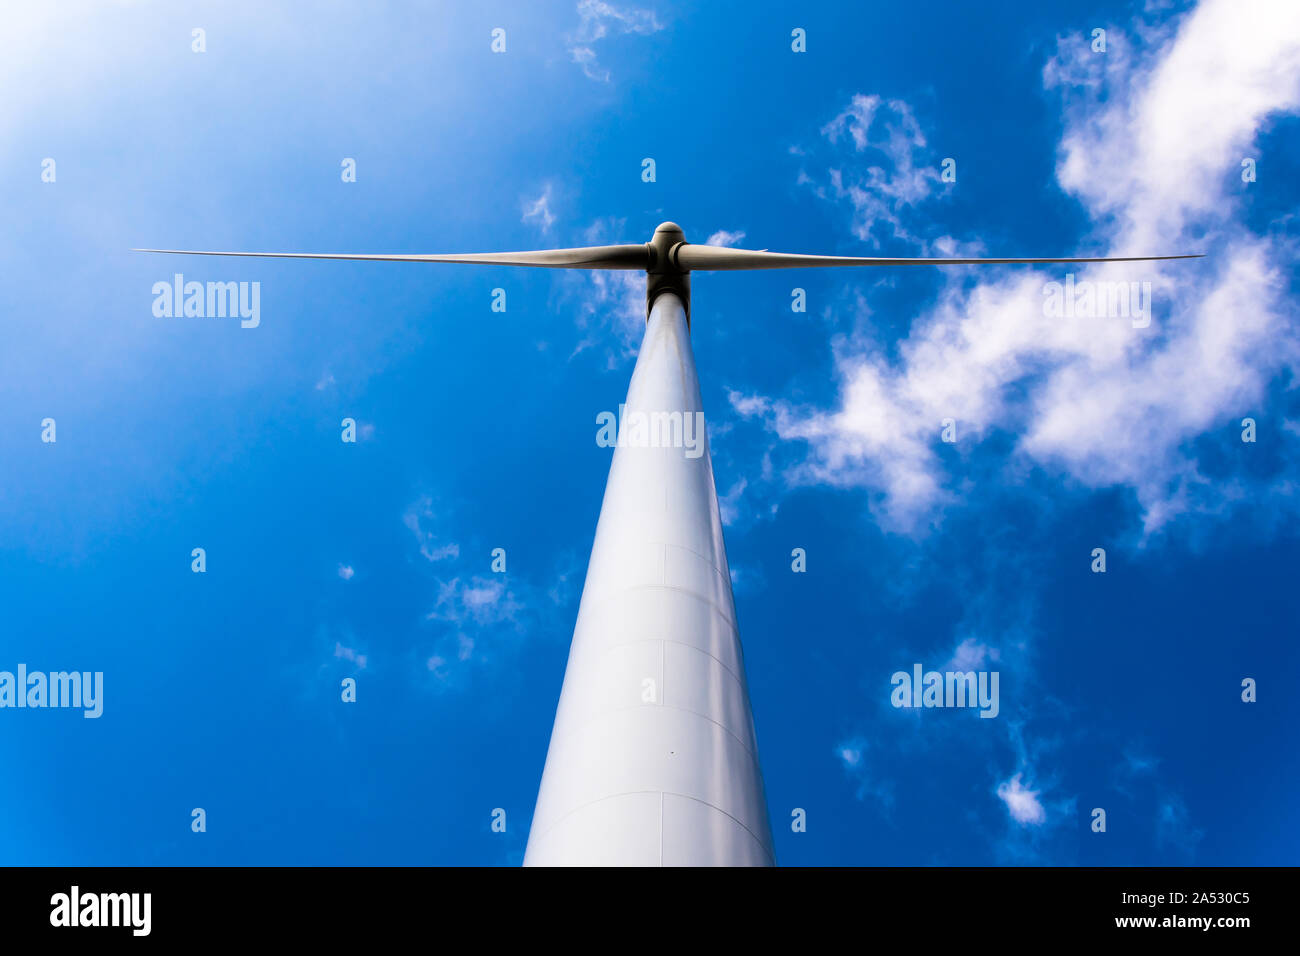 Windmills for the production of electrical energy. Wind farm of renewable, alternative and sustainable energy in Alta Anoia, Barcelona Stock Photo